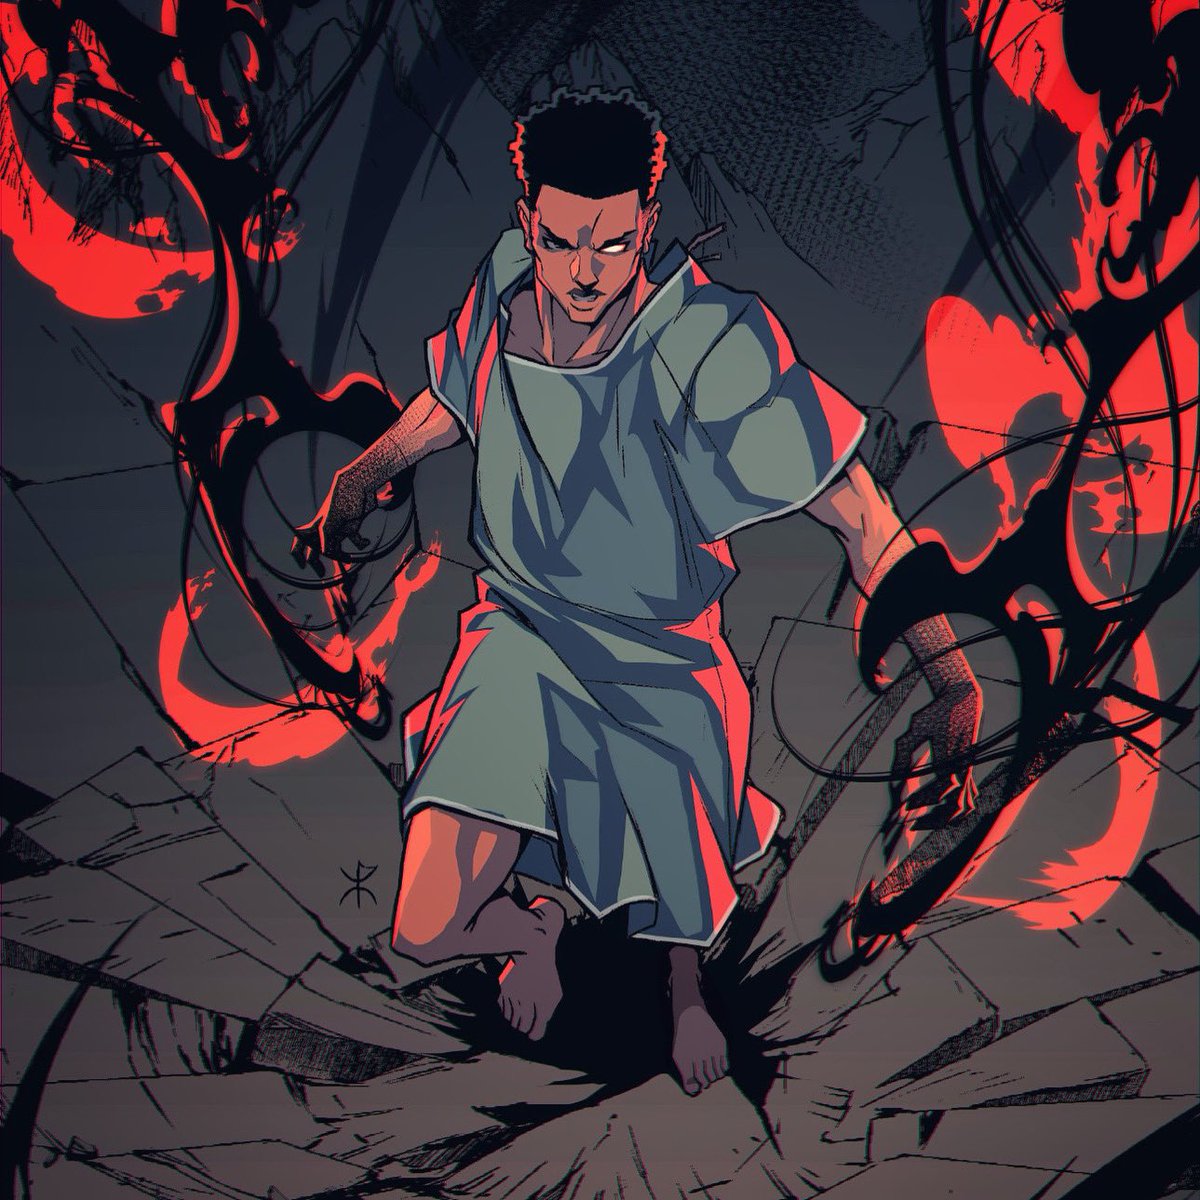 Haruki’s story starts out in the midst of tragedy. As you can see, he’s in a hospital gown already. Then things get worse…
-
Art by @apoloniodraws (Cropped and with a filter so yall can enjoy the cover when it drops)
-
#haruki #twilightabyss #wayofpaman #indiecomics #comicbooks